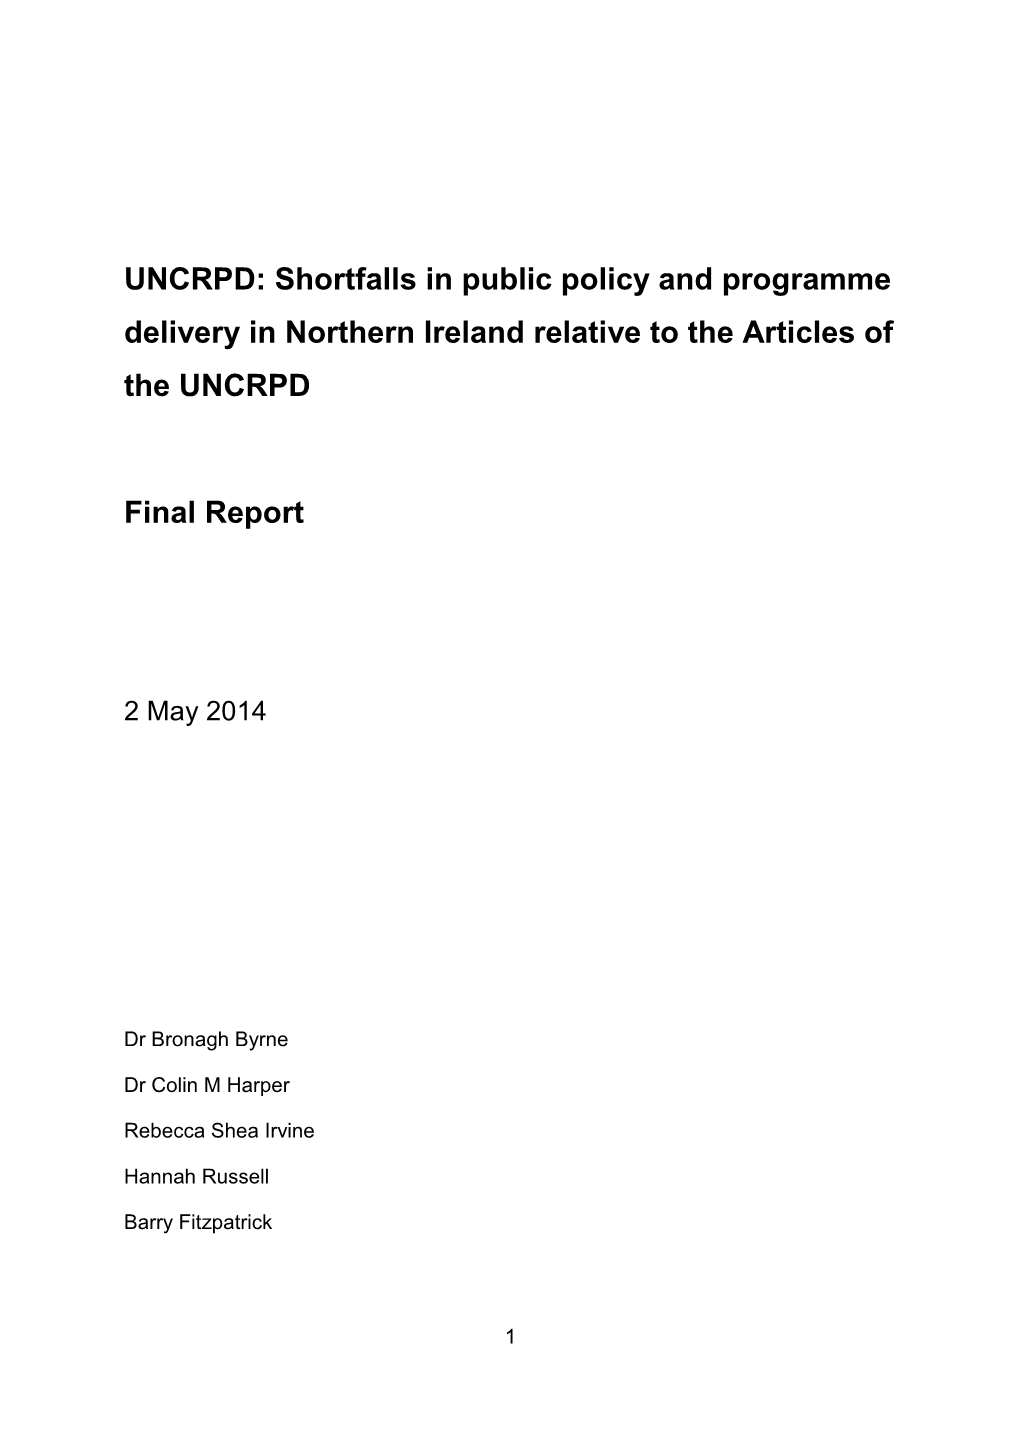 UNCRPD: Shortfalls in Public Policy and Programme Delivery in Northern Ireland Relative to the Articles of the UNCRPD